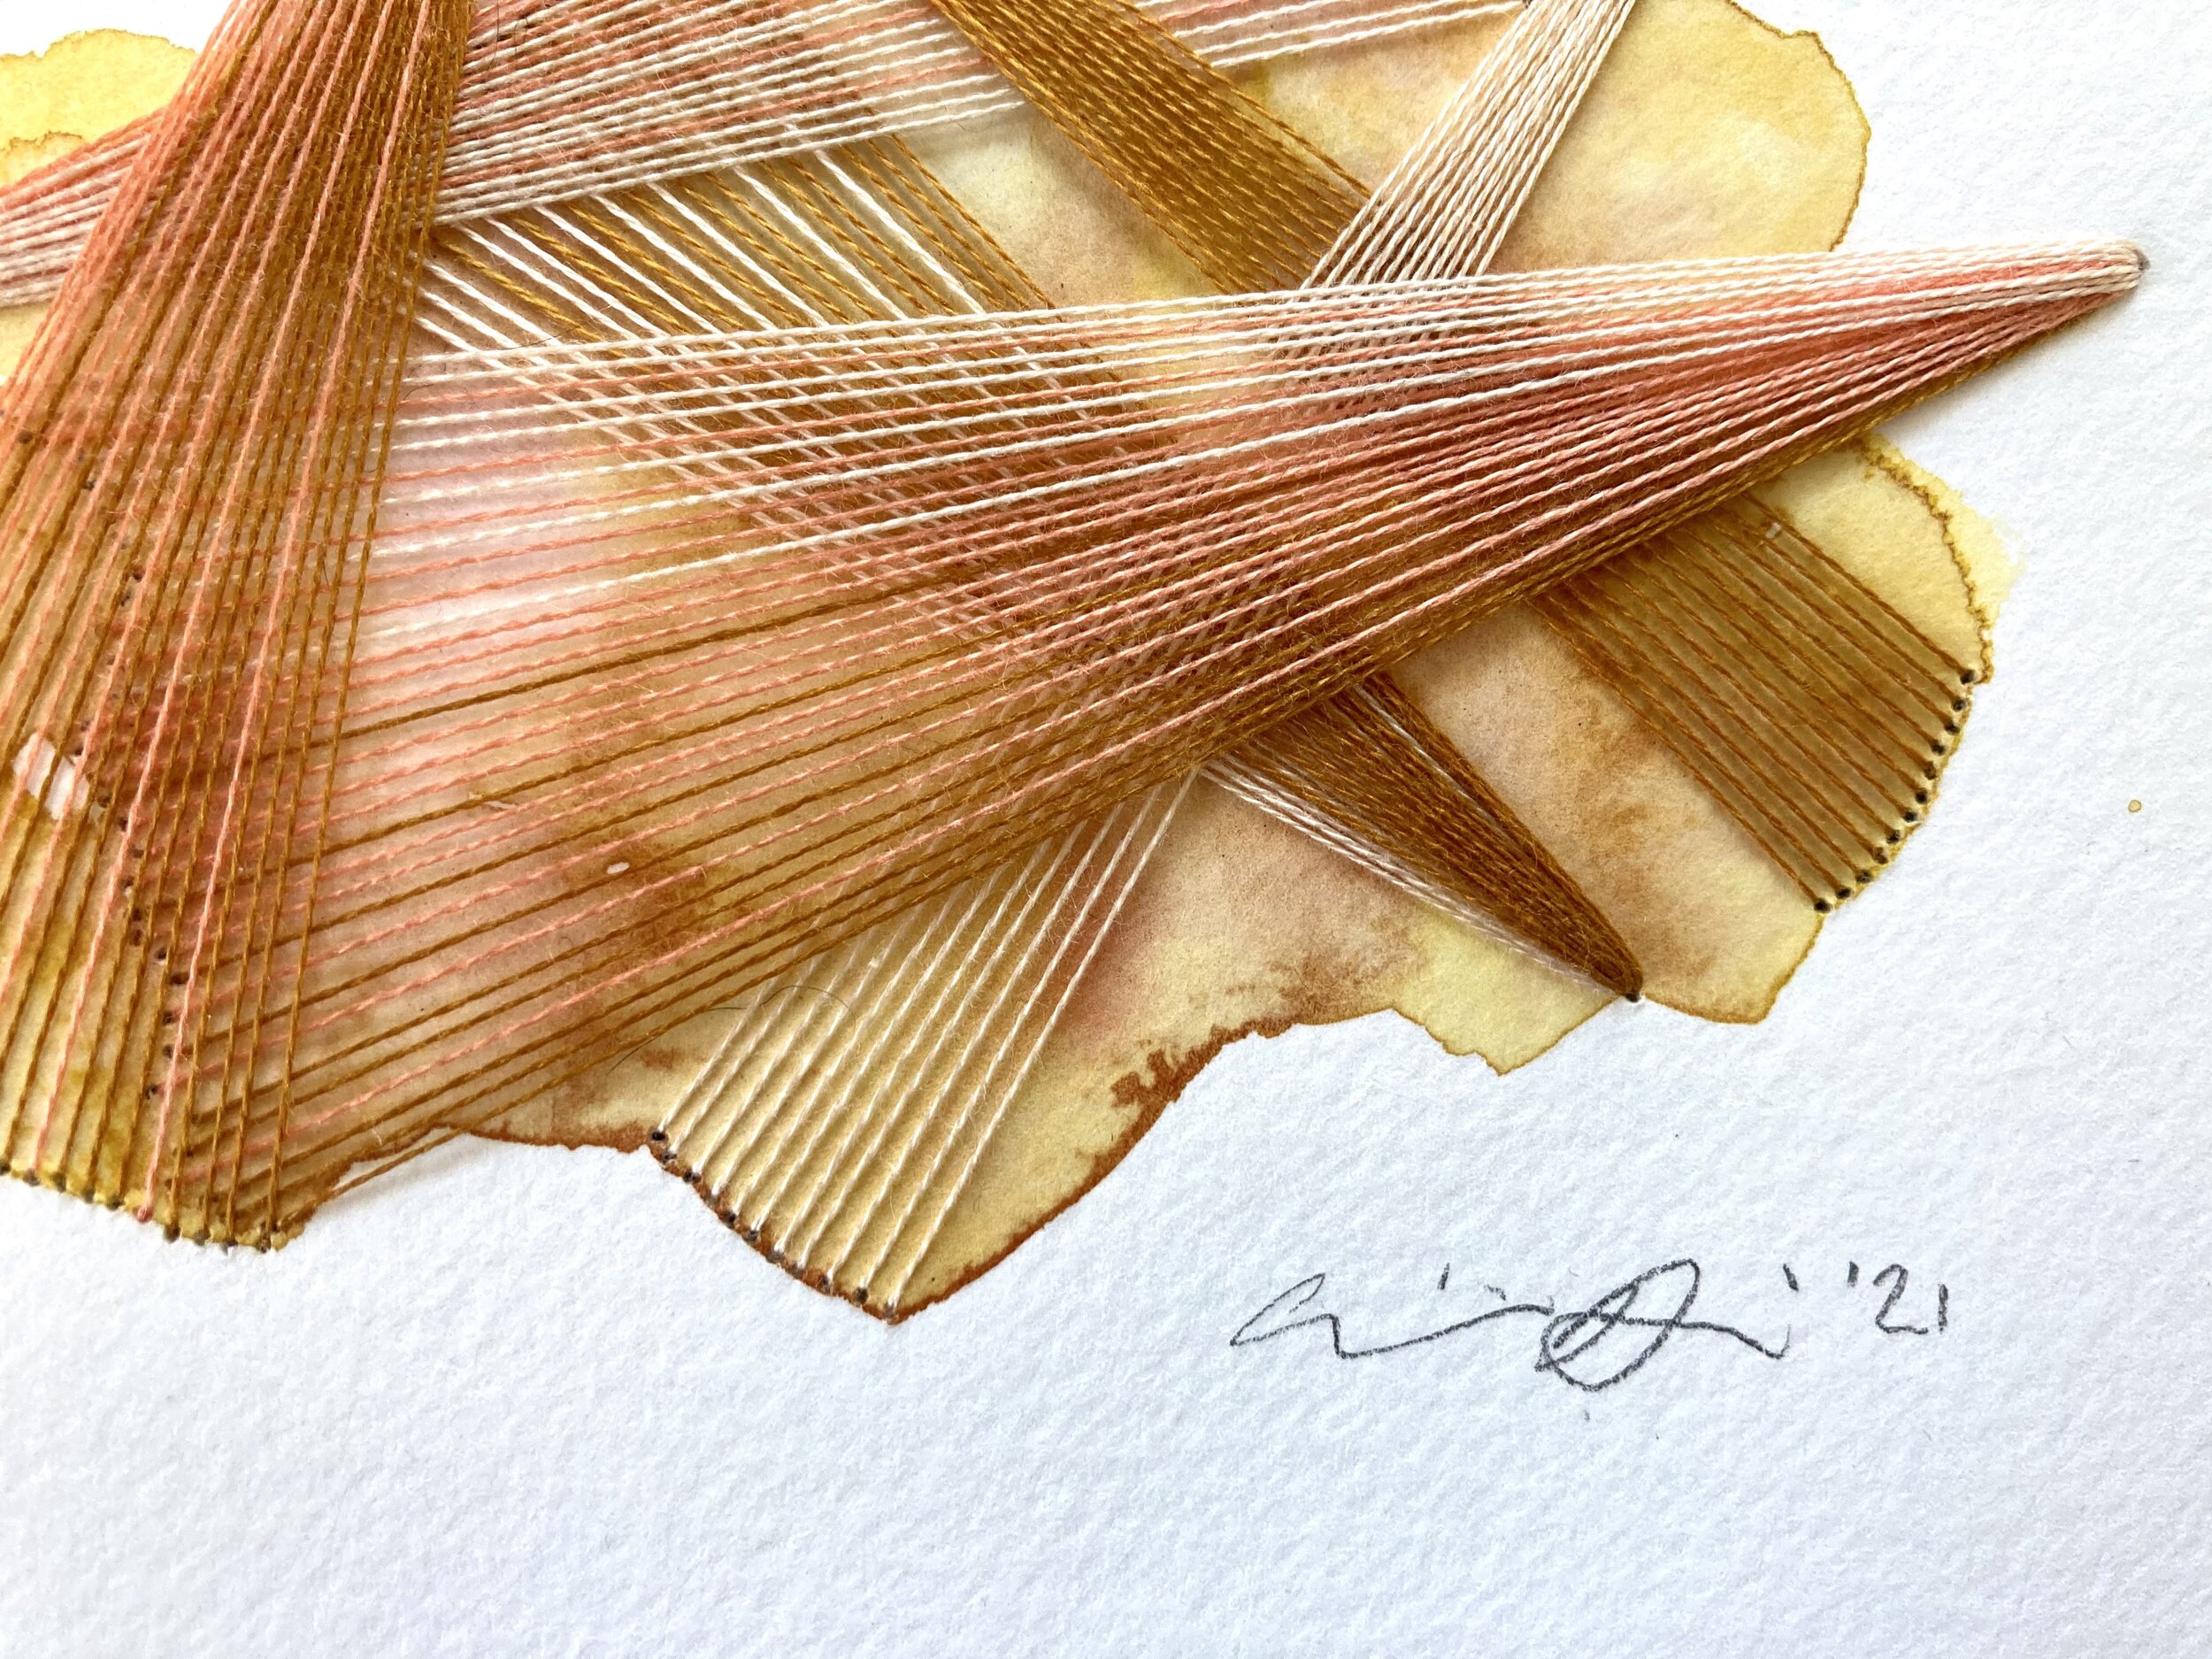 Watercolor and Embroidery in Golden Hour--detail 3